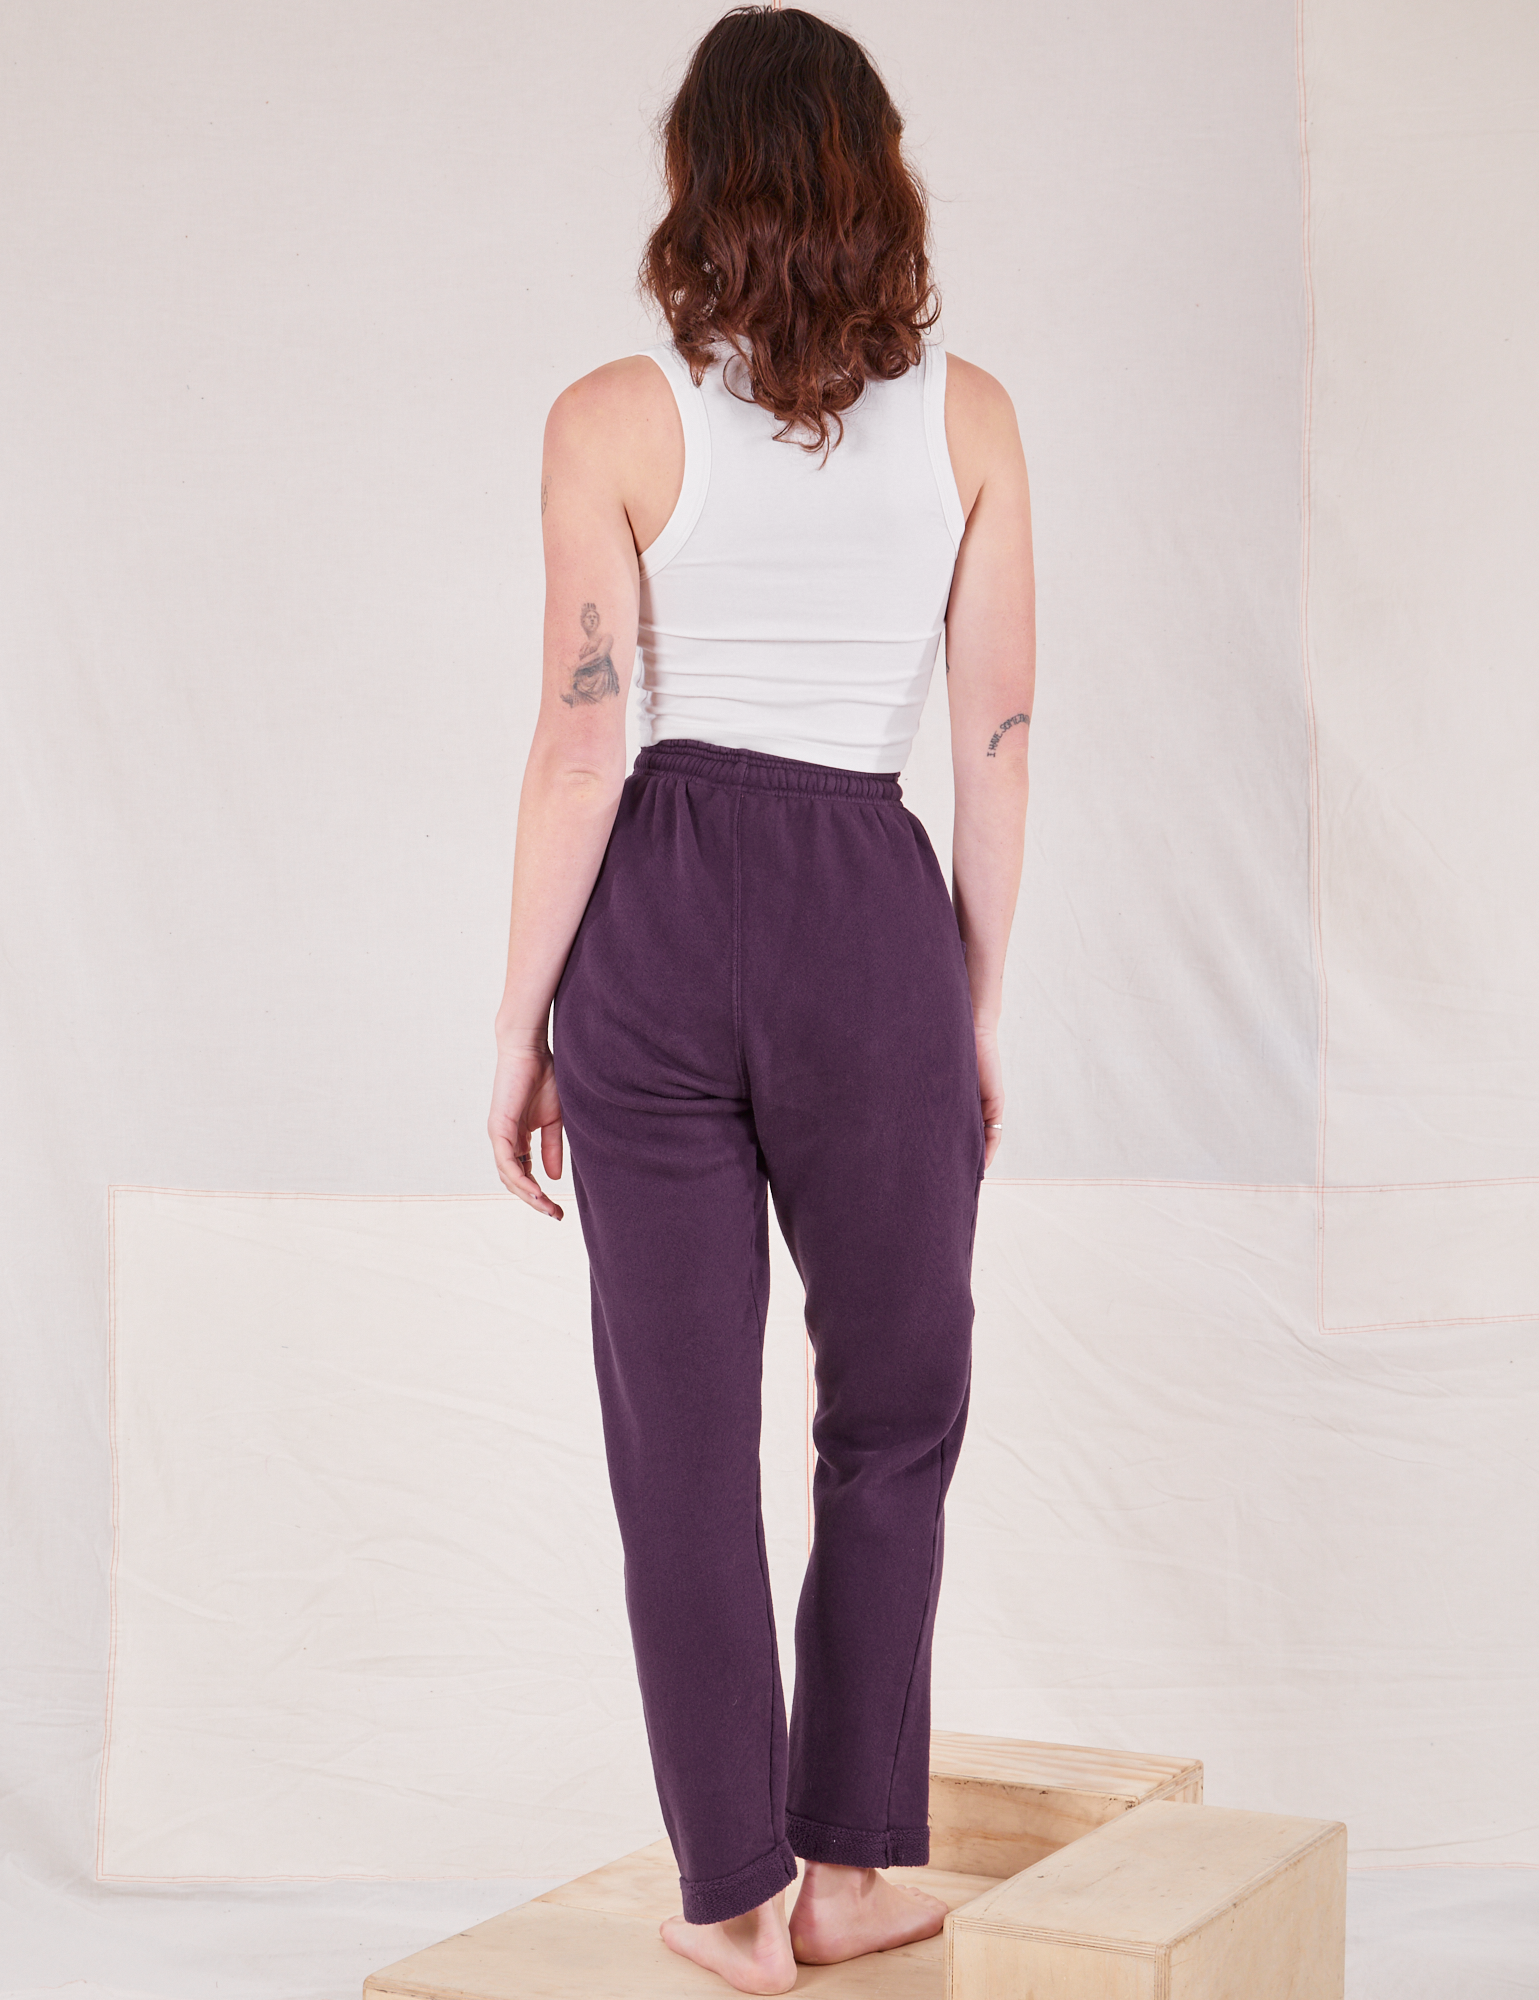 Back view of Rolled Cuff Sweat Pants in Nebula Purple and vintage off-white Cropped Tank Top on Alex